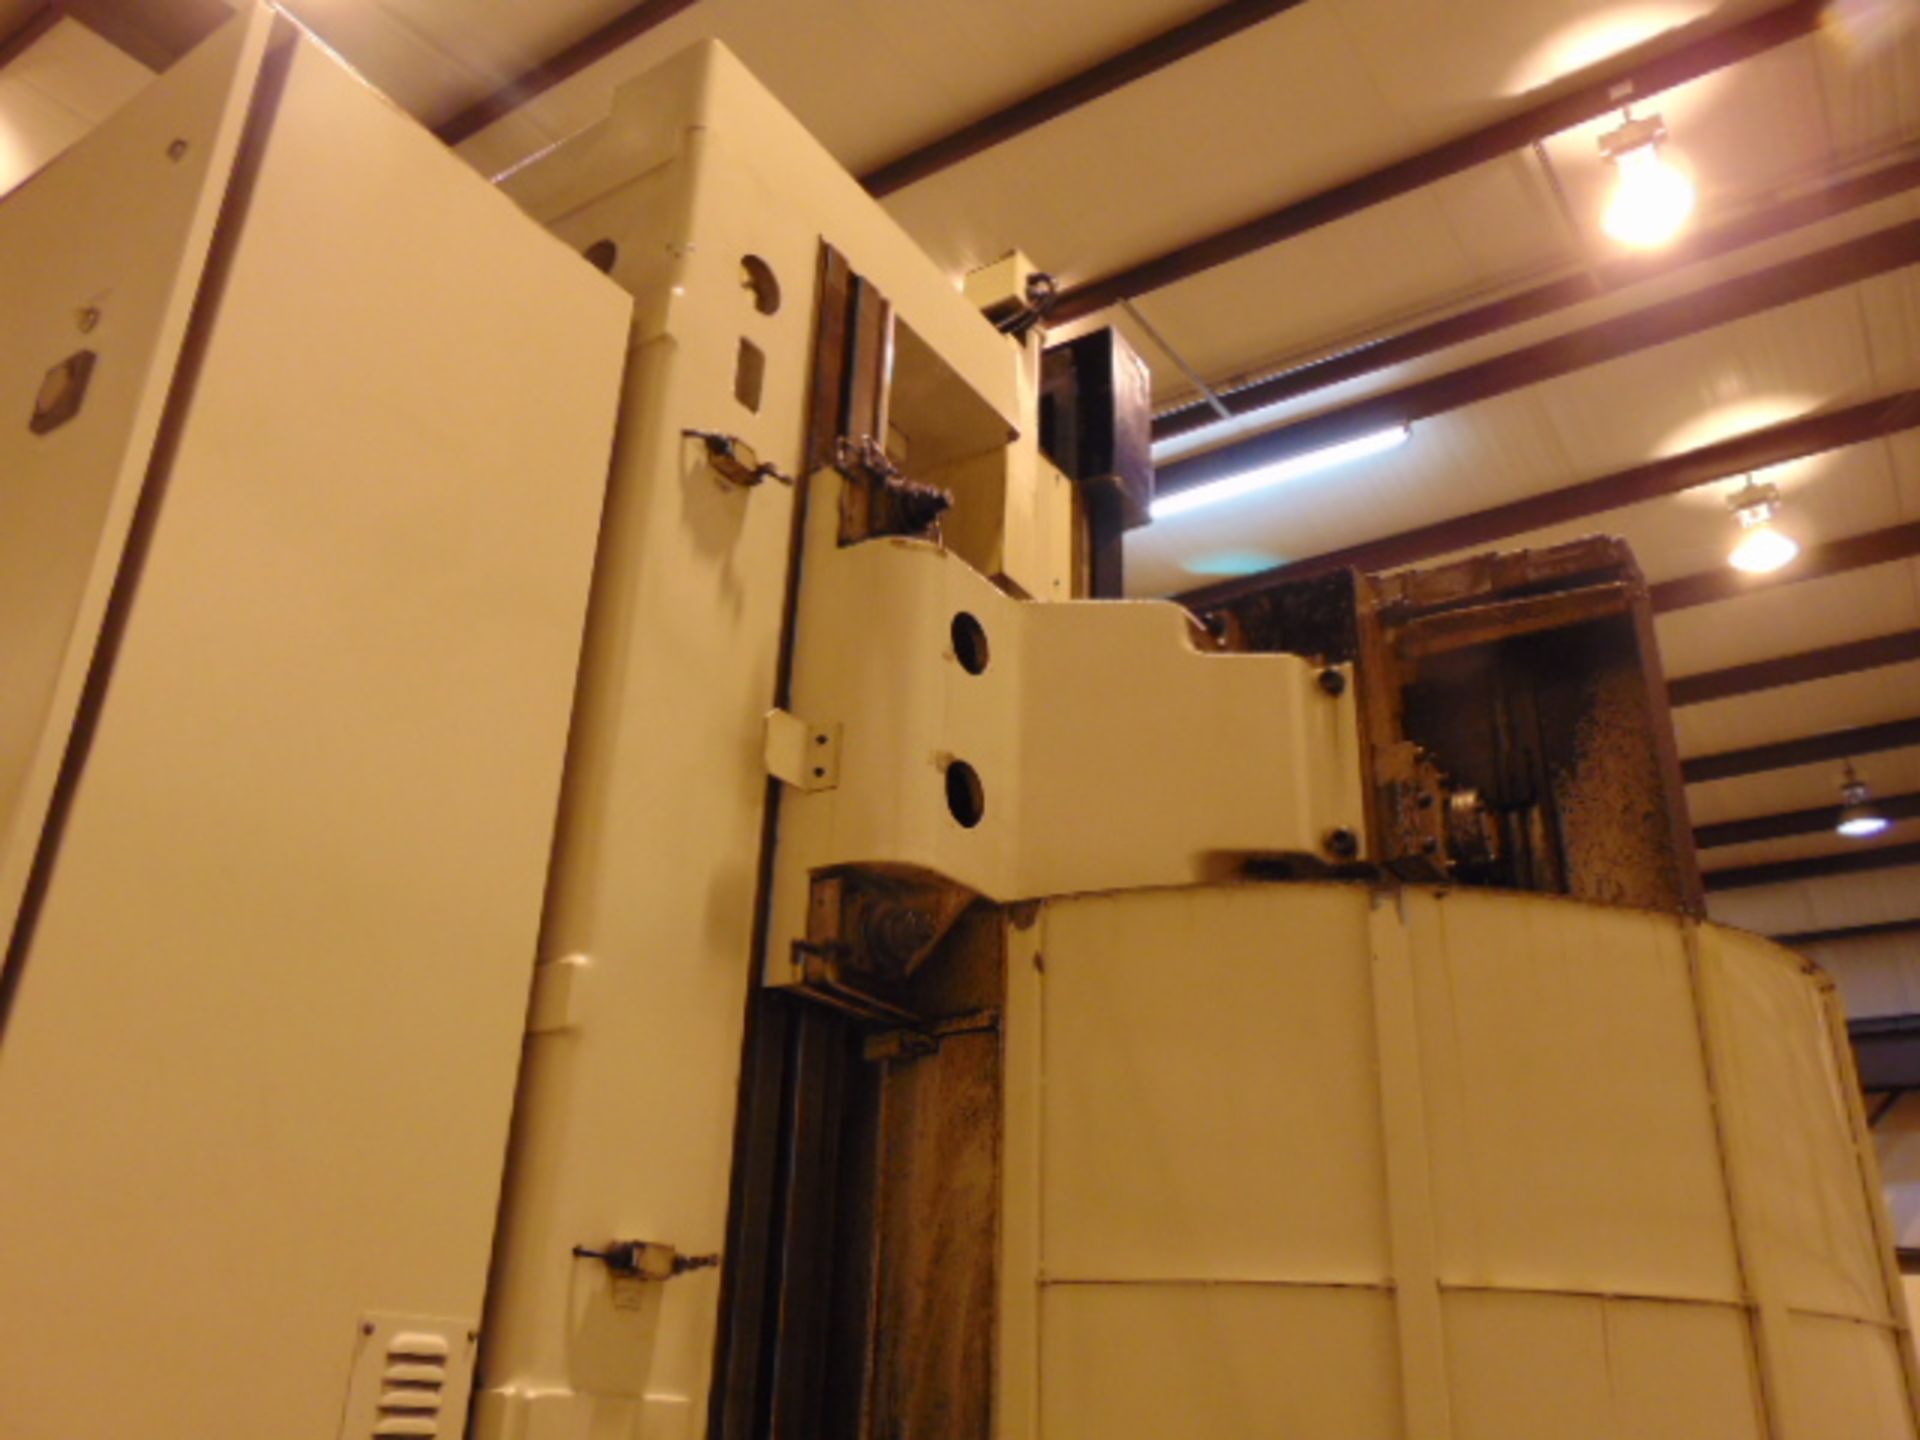 CNC VERTICAL BORING MILL, TOSHIBA MDL. TUE15, new 2001, Fanuc Series 18T CNC control, 59” plain - Image 9 of 16